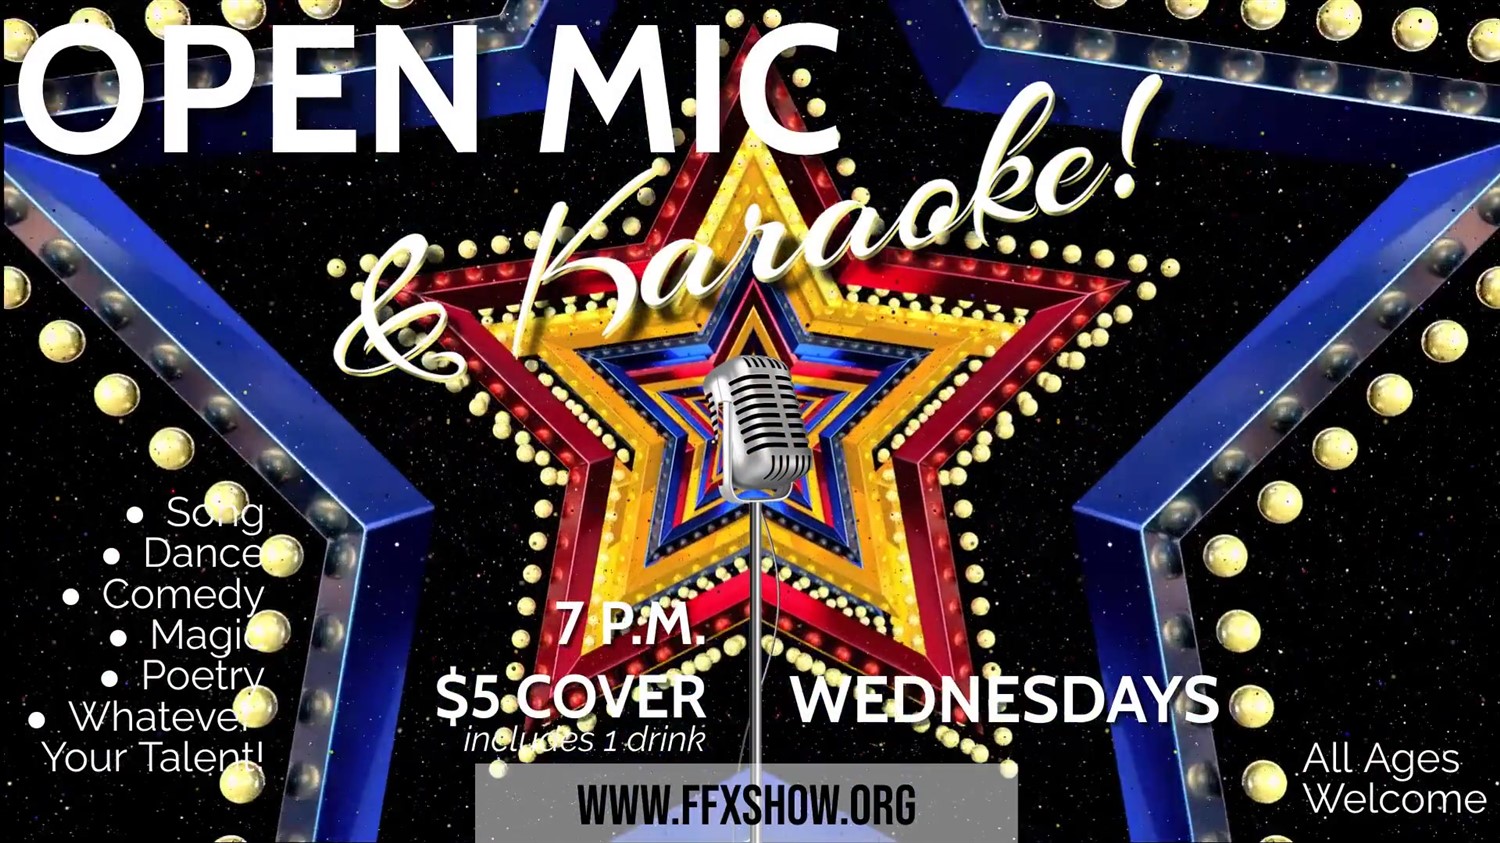 KARAOKE & OPEN MIC NIGHT Come and share your talents on the FFX Stage! on avr. 05, 19:00@FFX Theatre - Achetez des billets et obtenez des informations surFamily Fun Xperience tickets.ffxshow.org